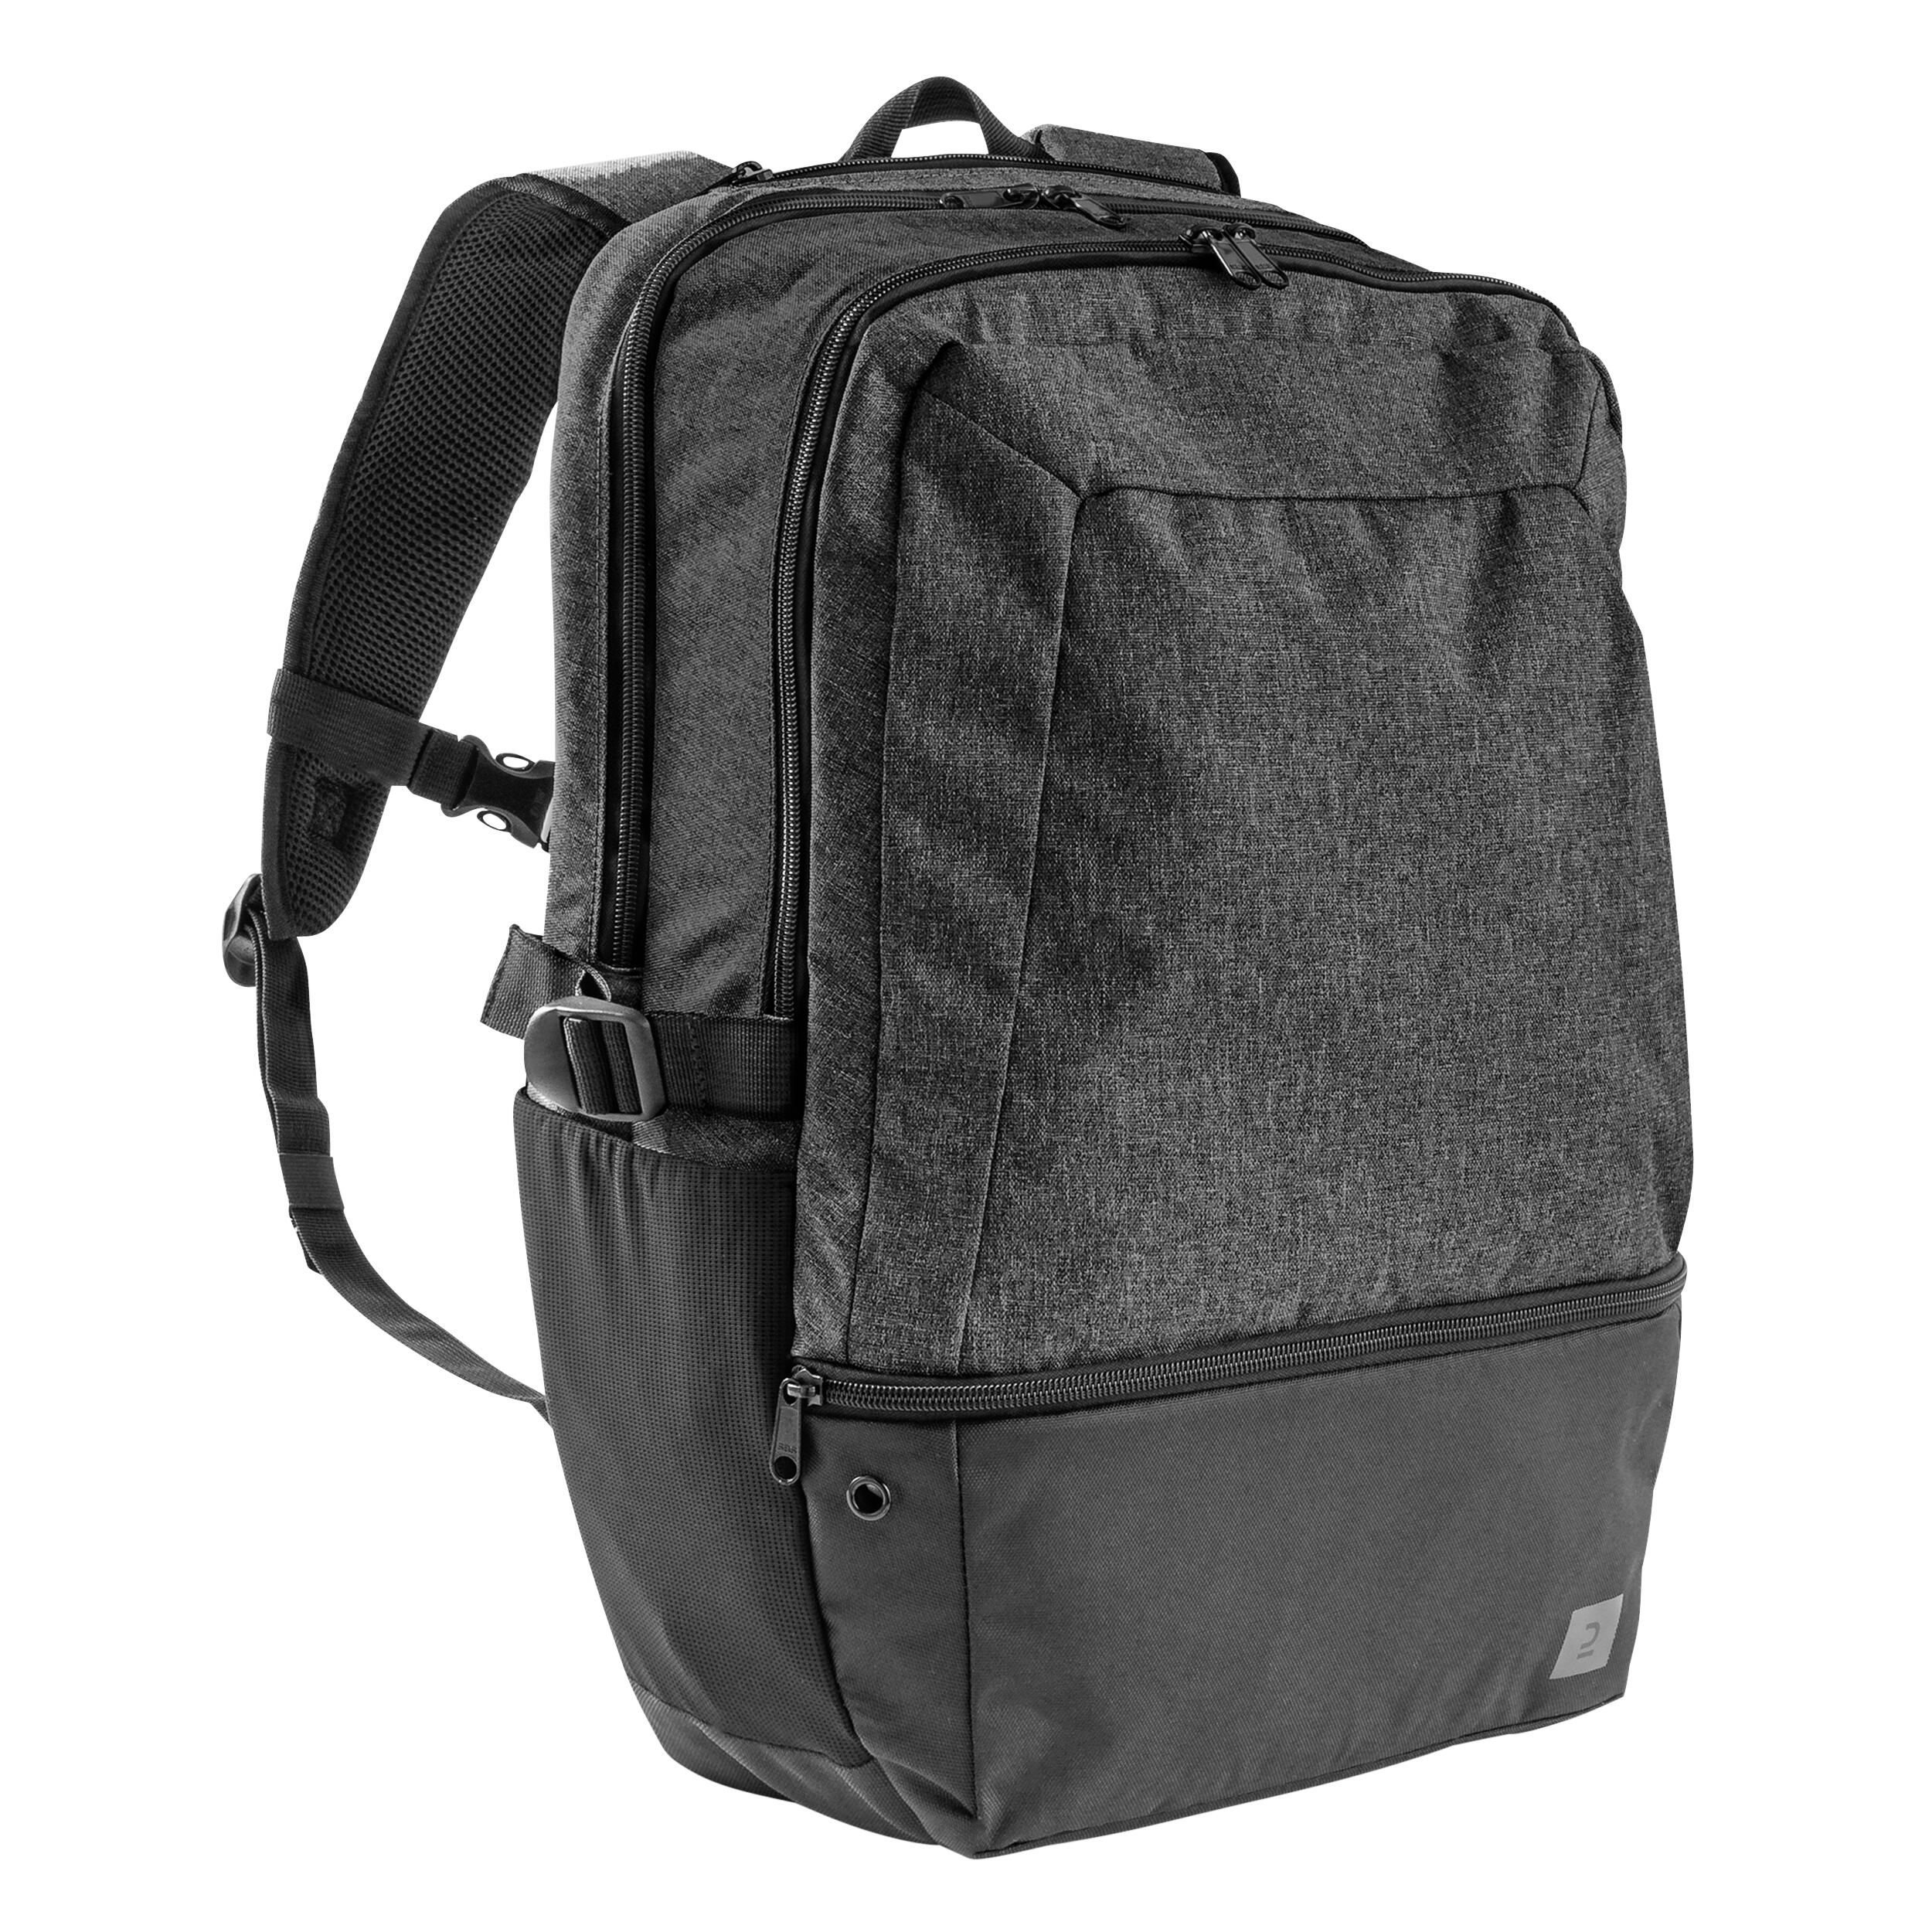 Kipsta By Decathlon Black Solid Duffel Bag Price in India, Full  Specifications & Offers | DTashion.com